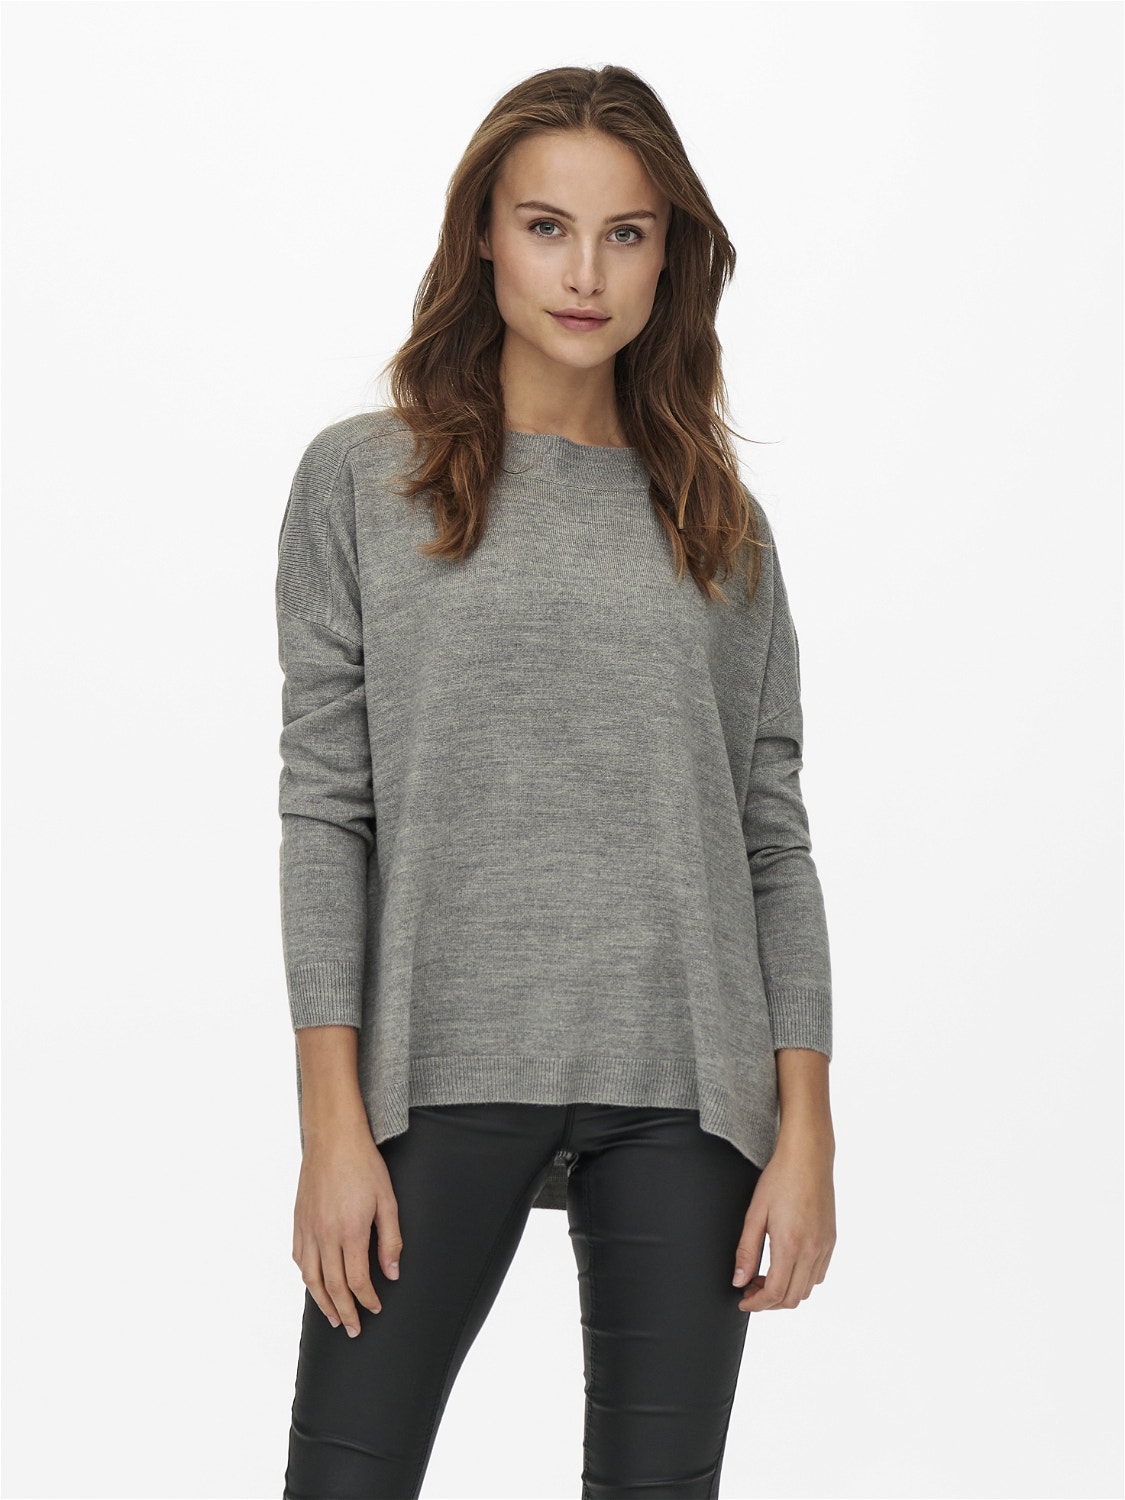 ONLY Solid colored Knitted Pullover -Medium Grey Melange - 15231415